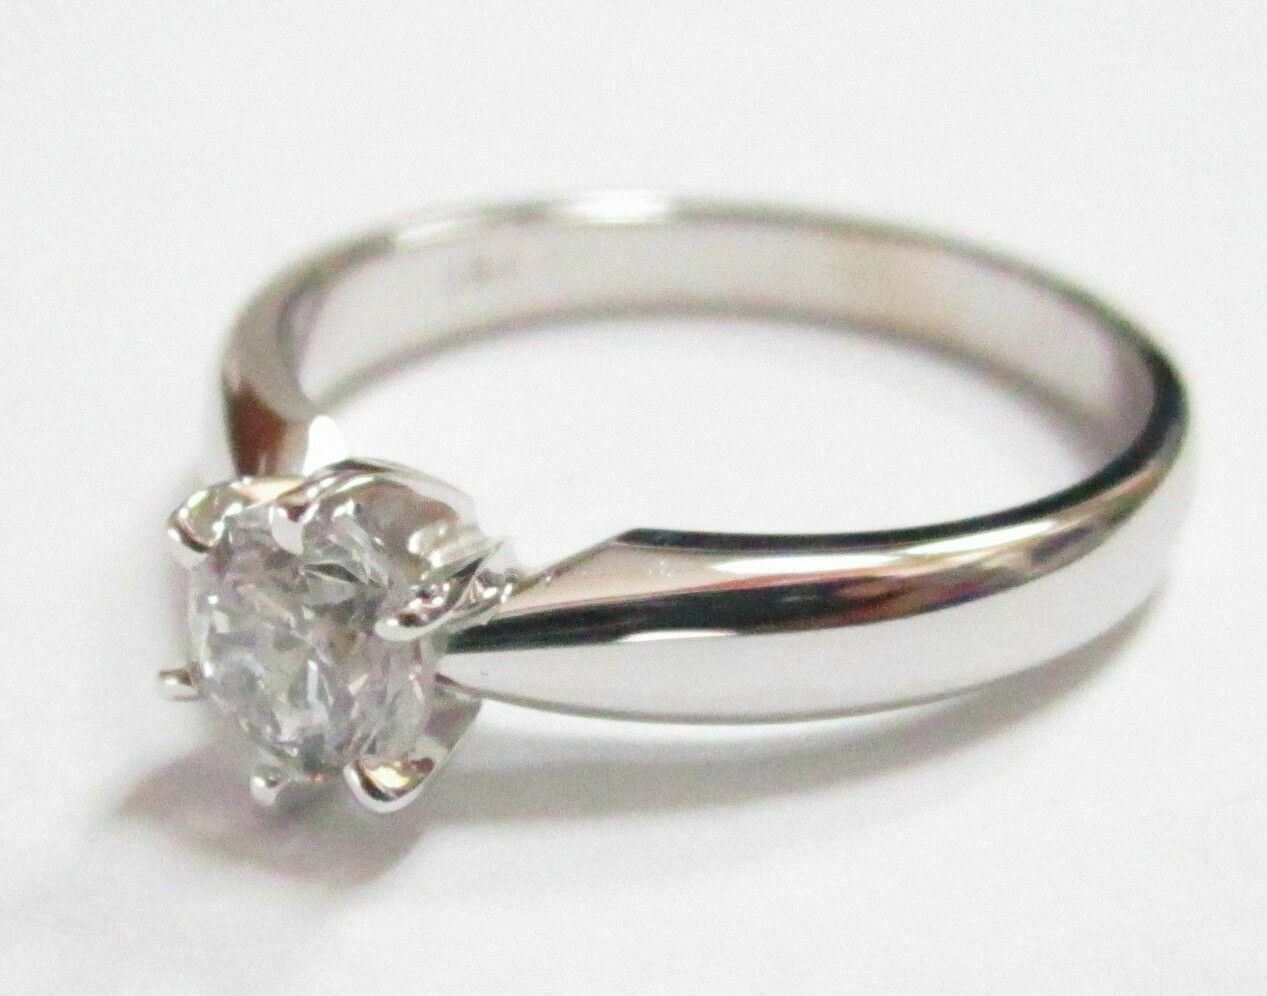 .48Ct Round Brilliant Cut Diamond Solitaire Engagement Ring Size 5.5 G SI-3